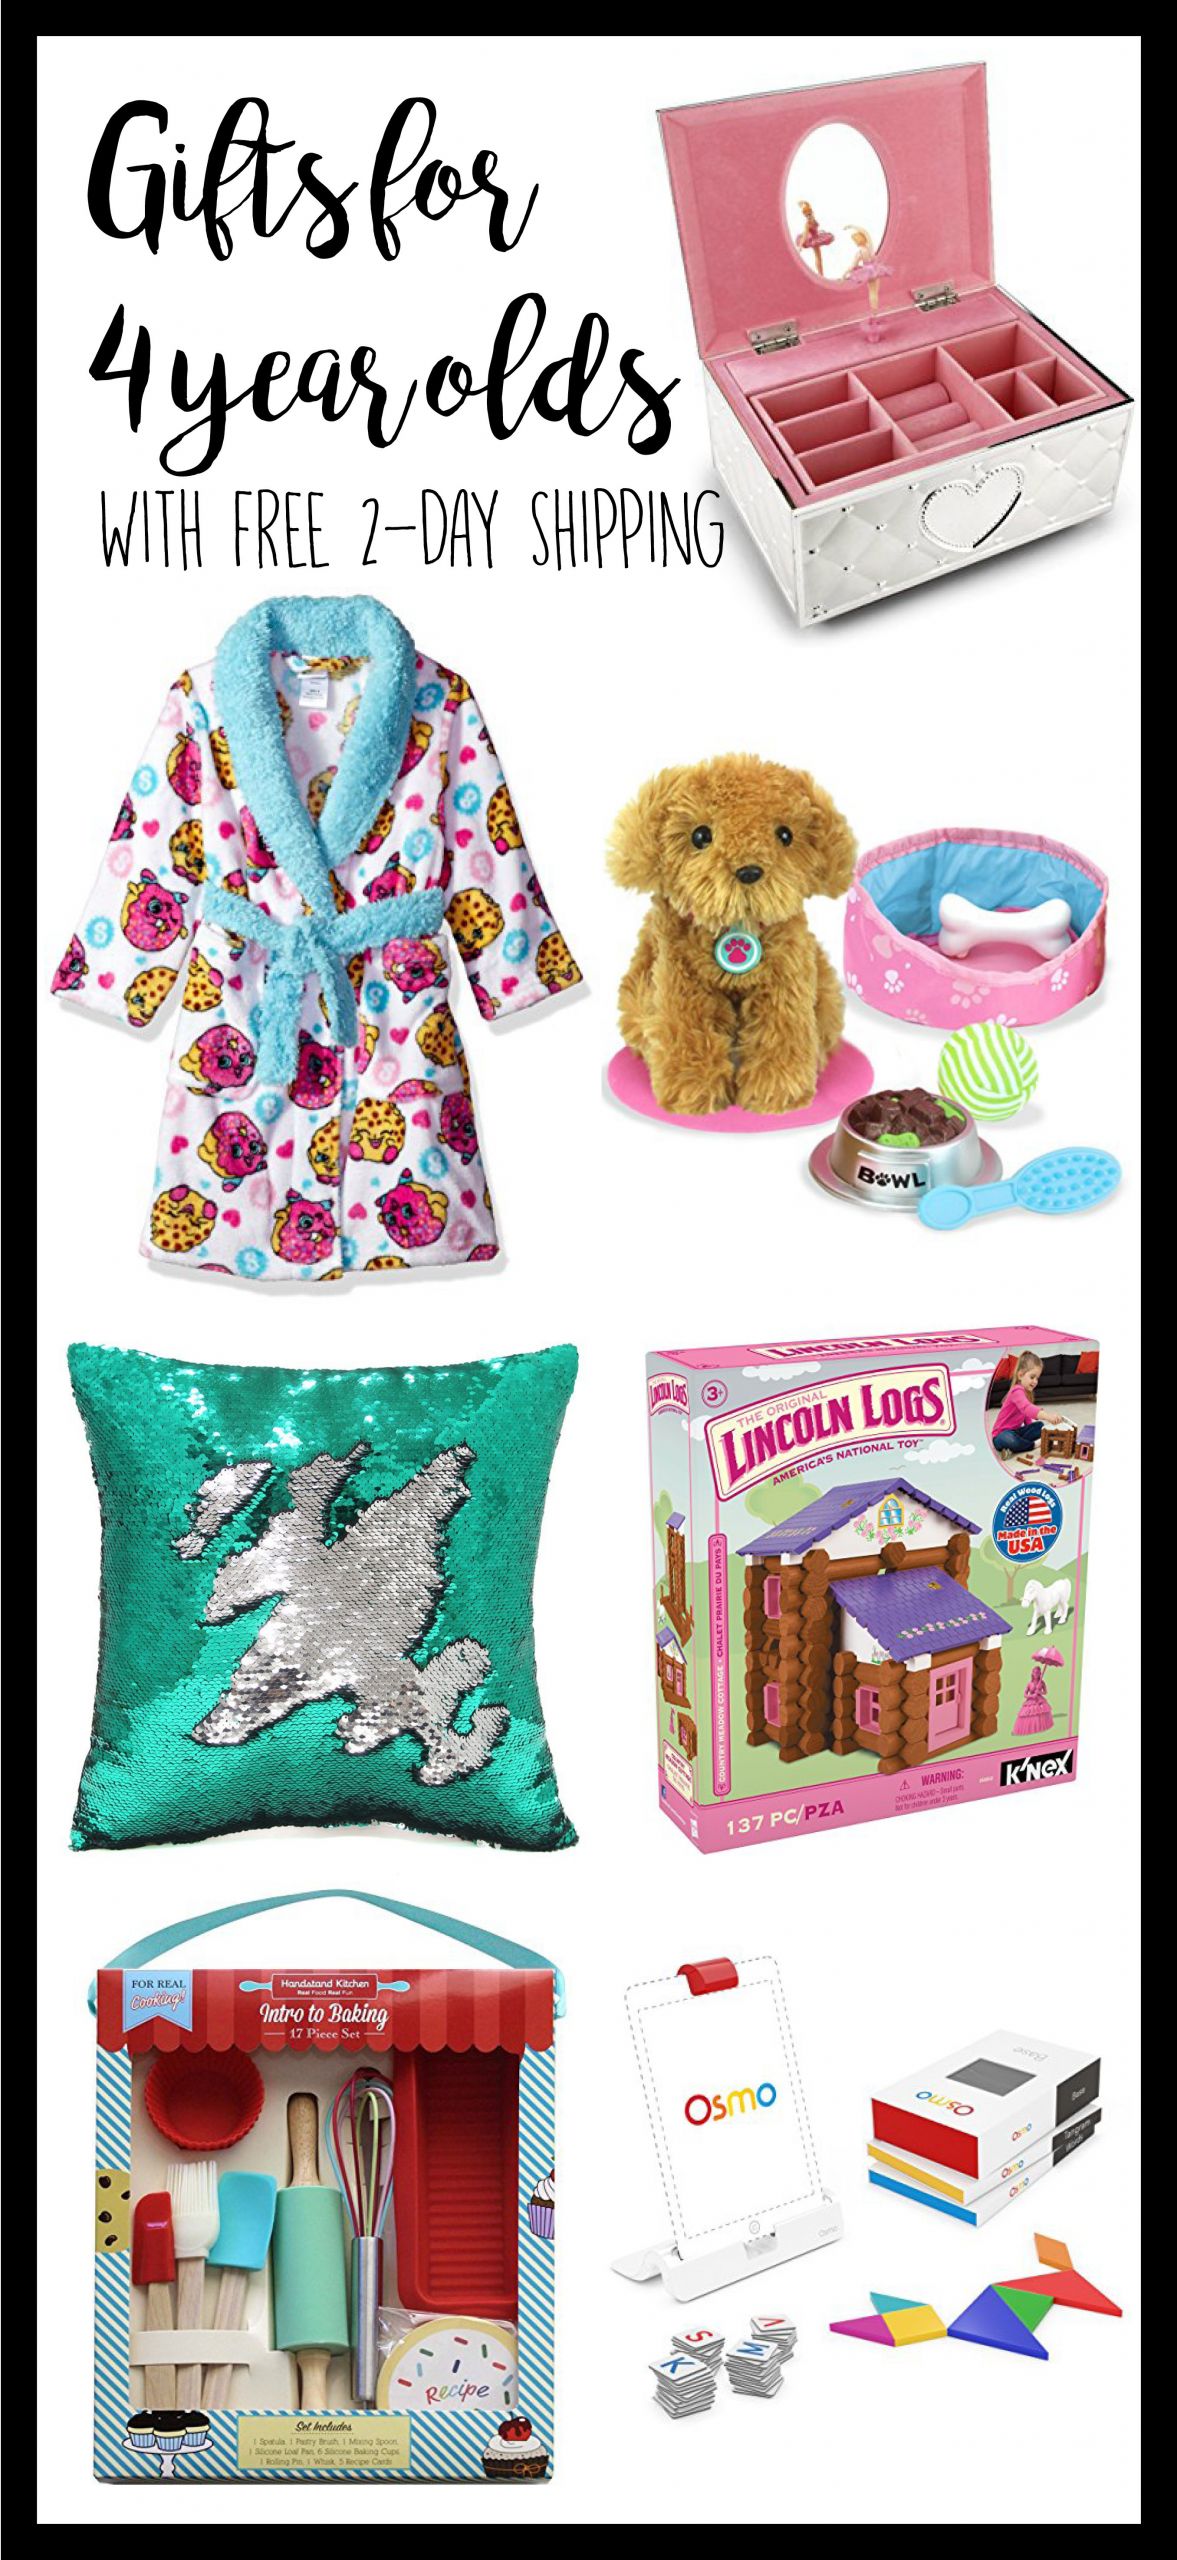 Christmas Gift Ideas For 4 Yr Old Girl
 4 Year Old Gift Ideas Gift ideas for 4 year old Girls